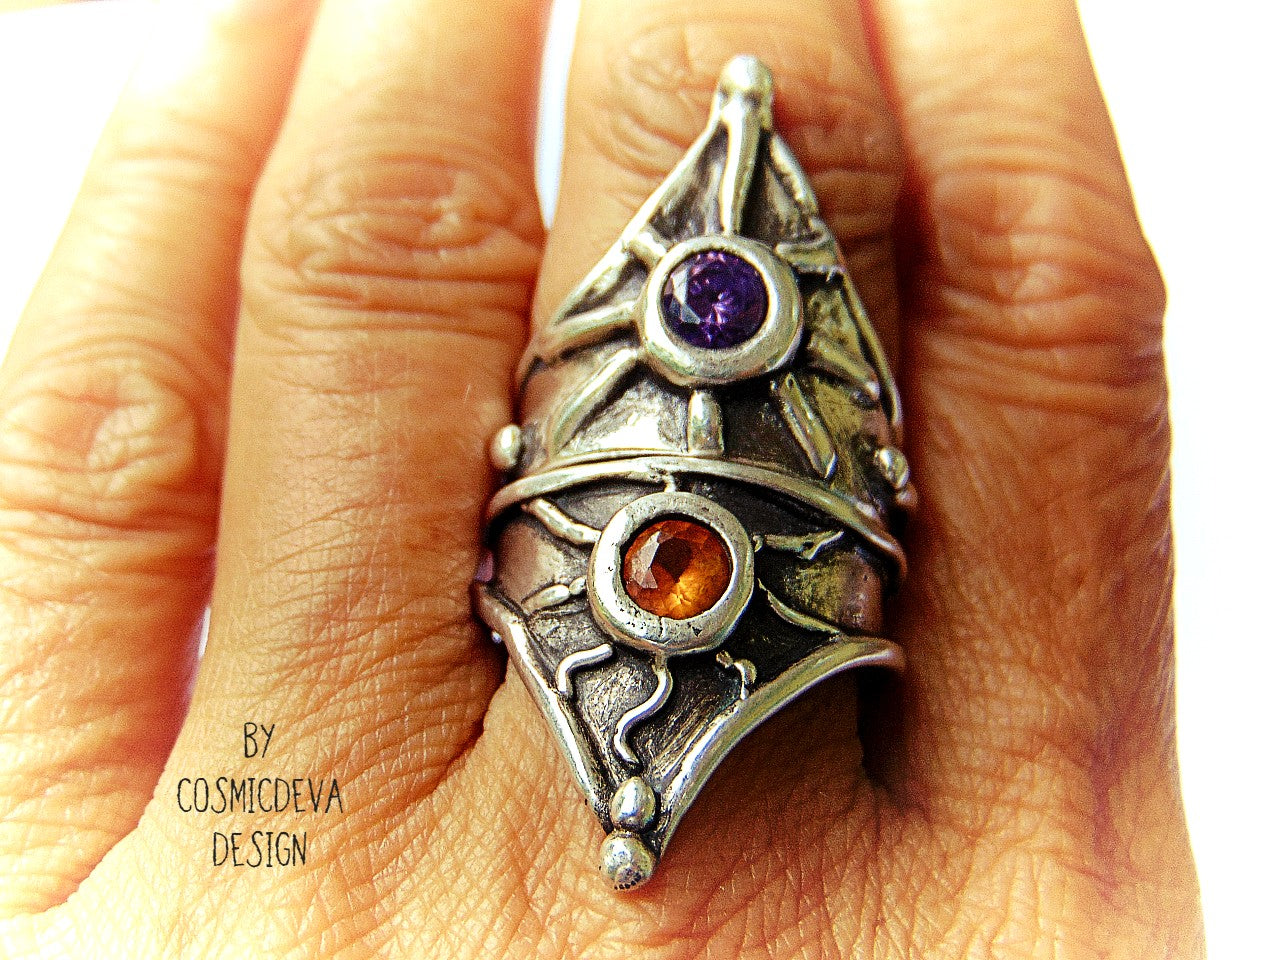 Unique handcrafted medieval triangle shaped shield silver ring with a 5 mm round amethyst stone. This Ring is made of solid .999 fine silver and hallmarked as it. The ring was oxidized to give it a vintage antique design.